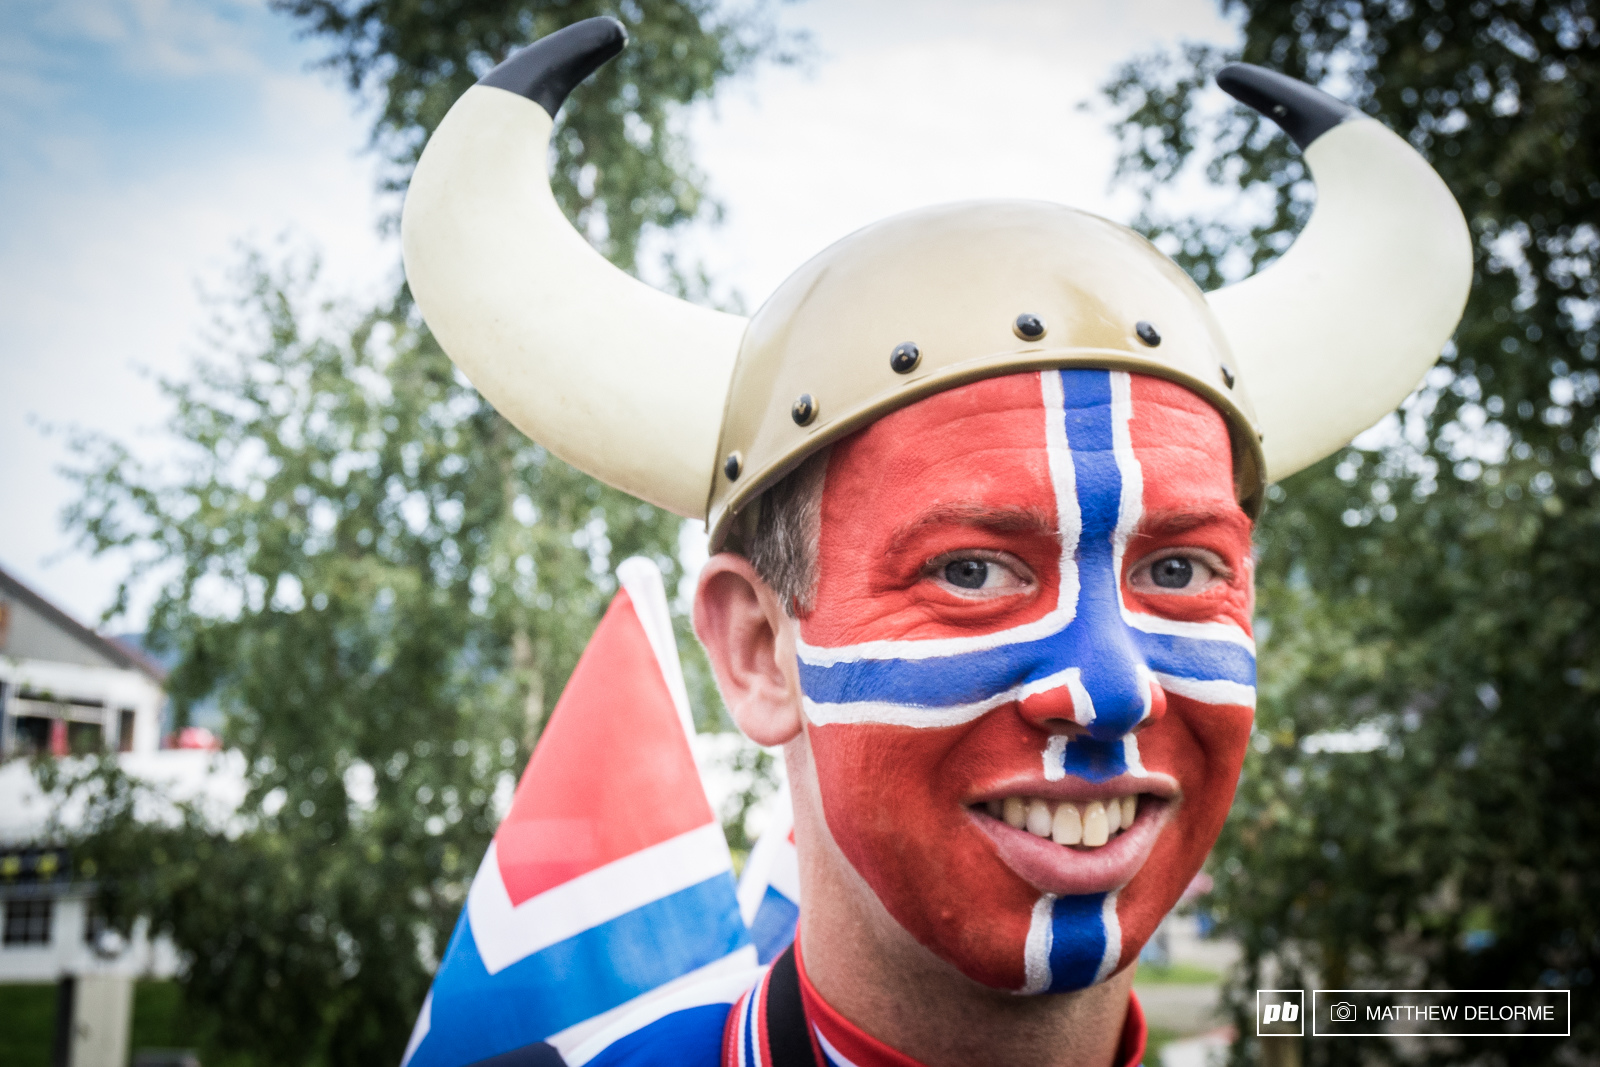 The vikings were out in force to cheer on their country men and women.